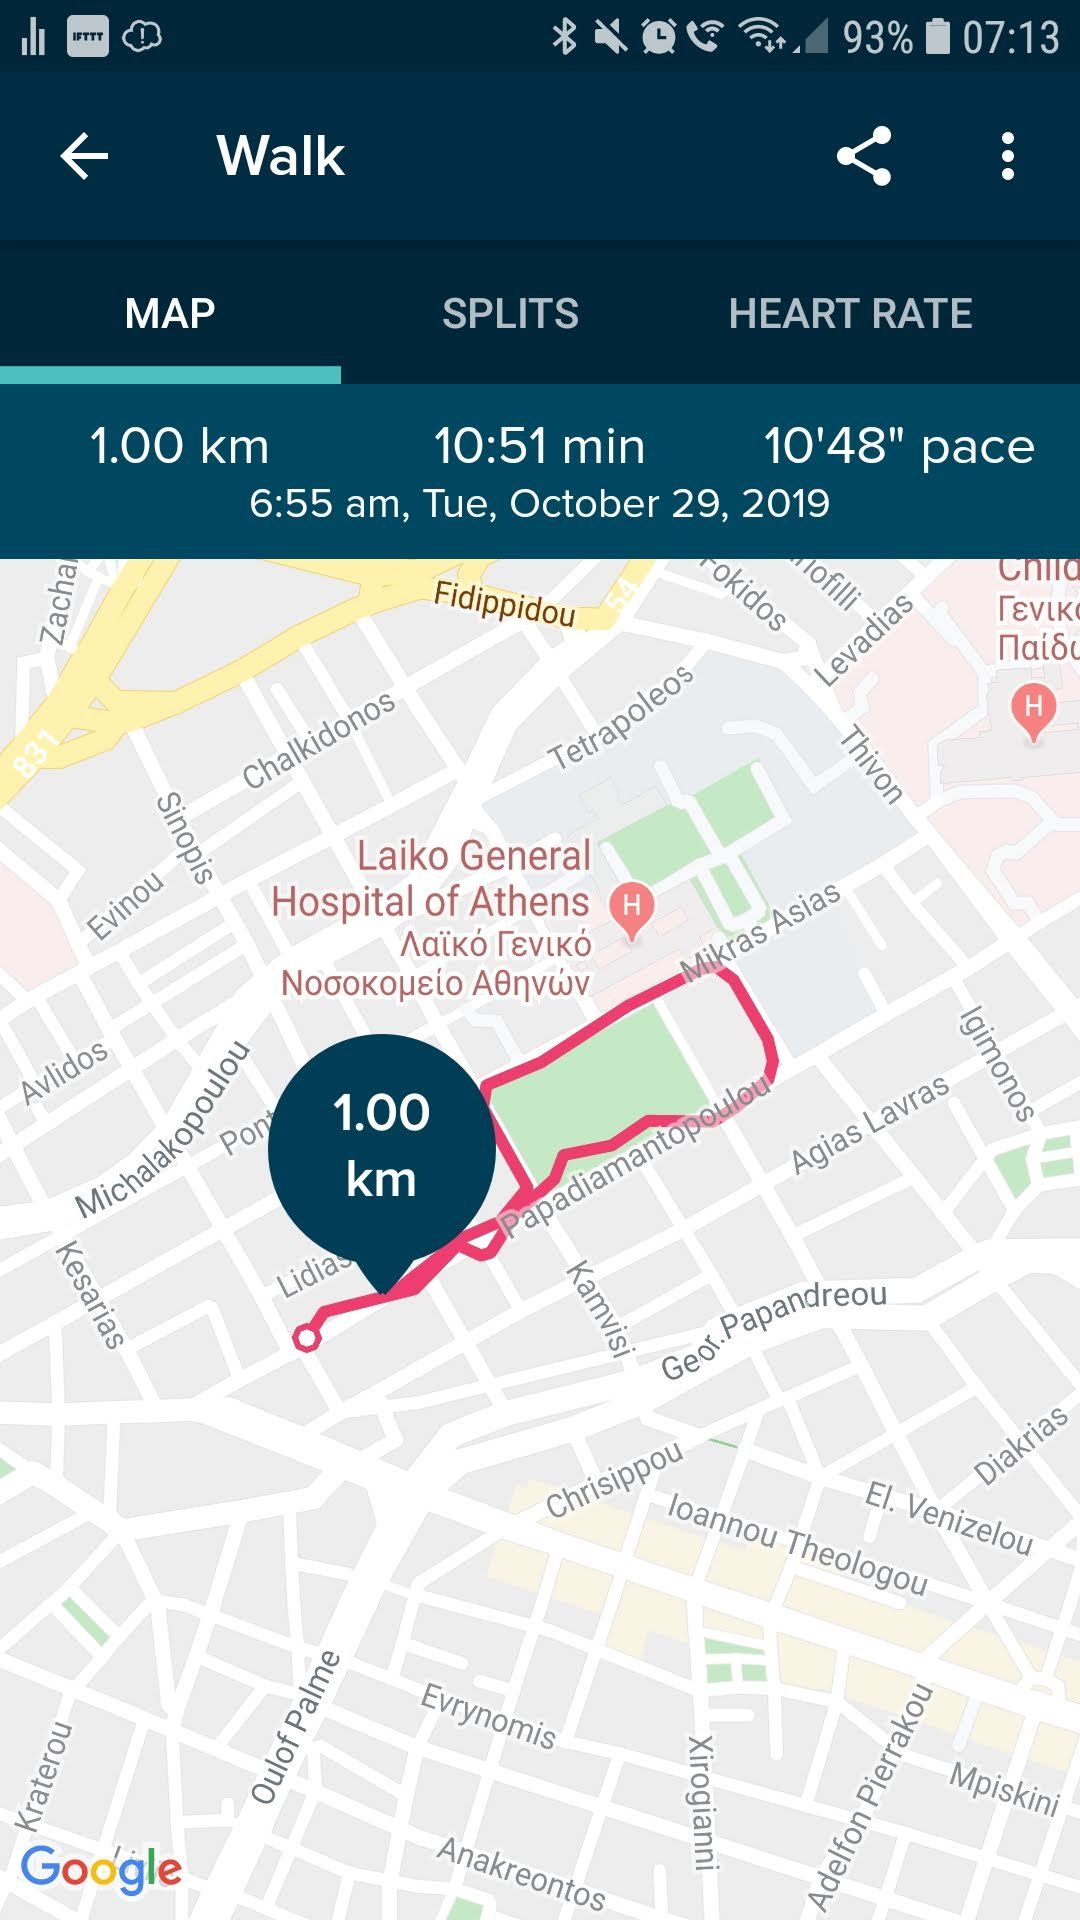 fitbit connected gps is running inspire hr